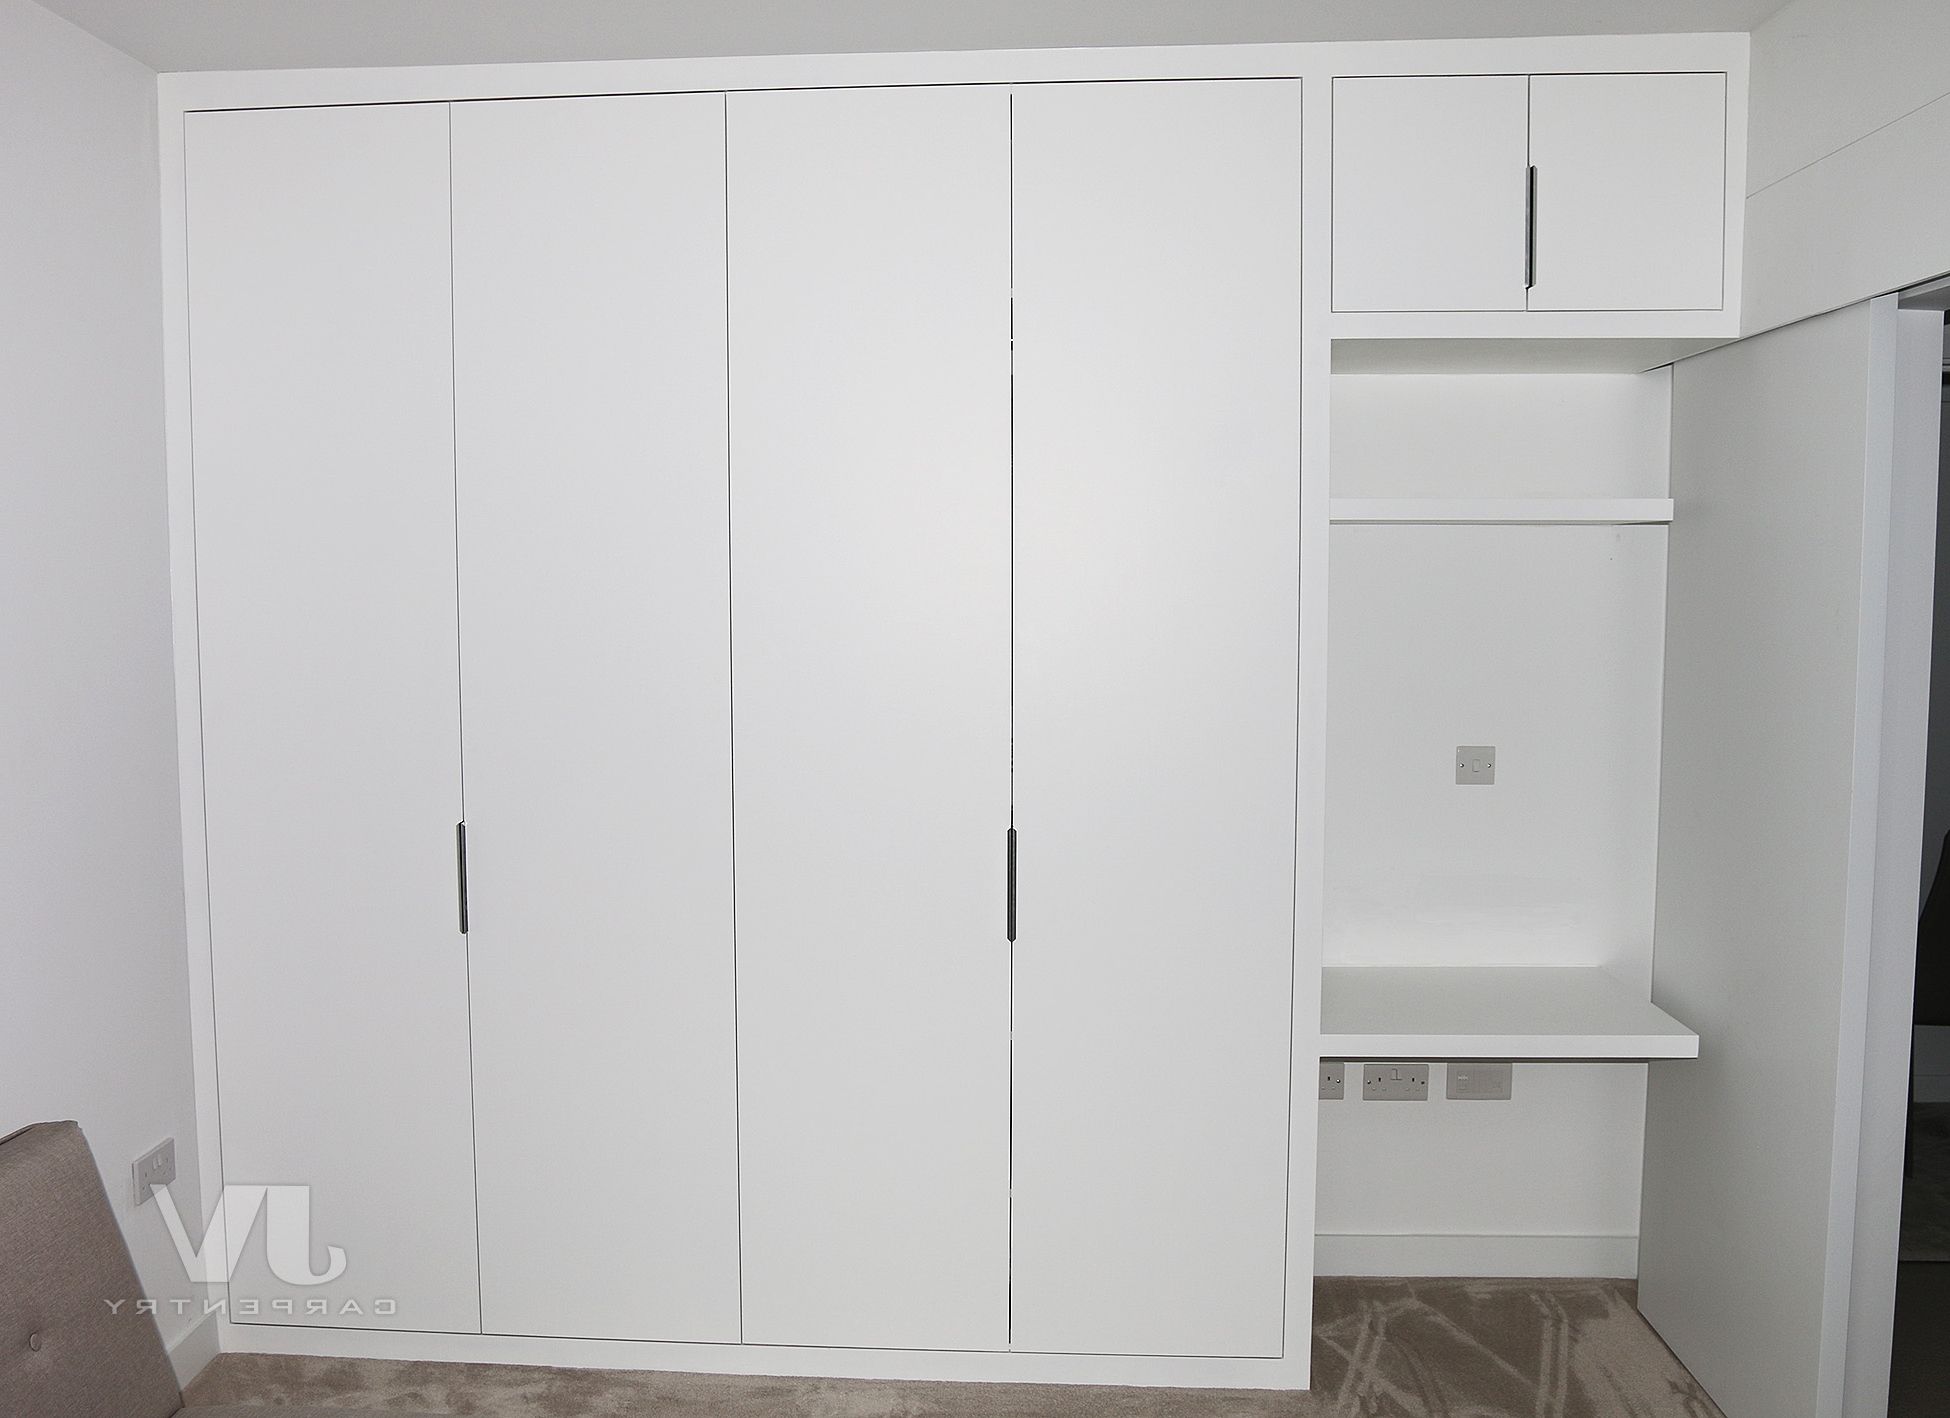 9 Fitted Wardrobes With Dressing Table Ideas | Jv Carpentry Inside Wardrobes And Dressing Tables (View 15 of 20)